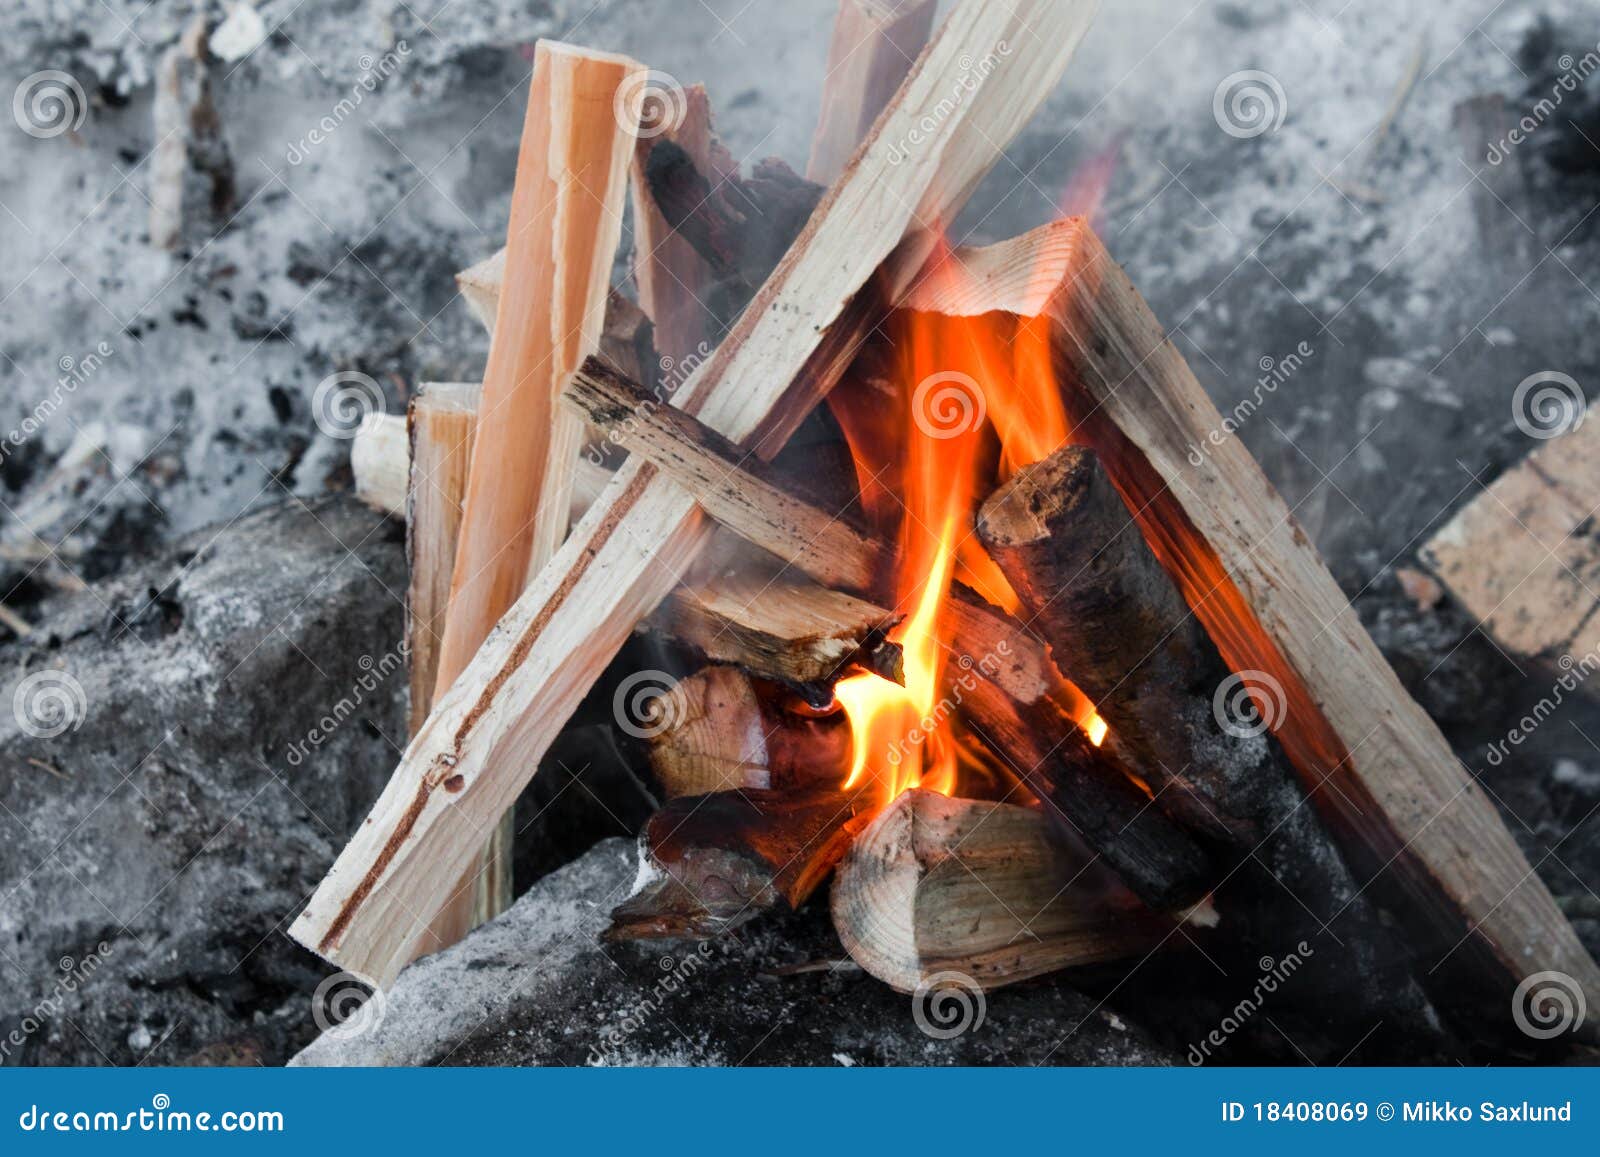 Camp fire stock image. Image of snovy, camping, fire - 18408069